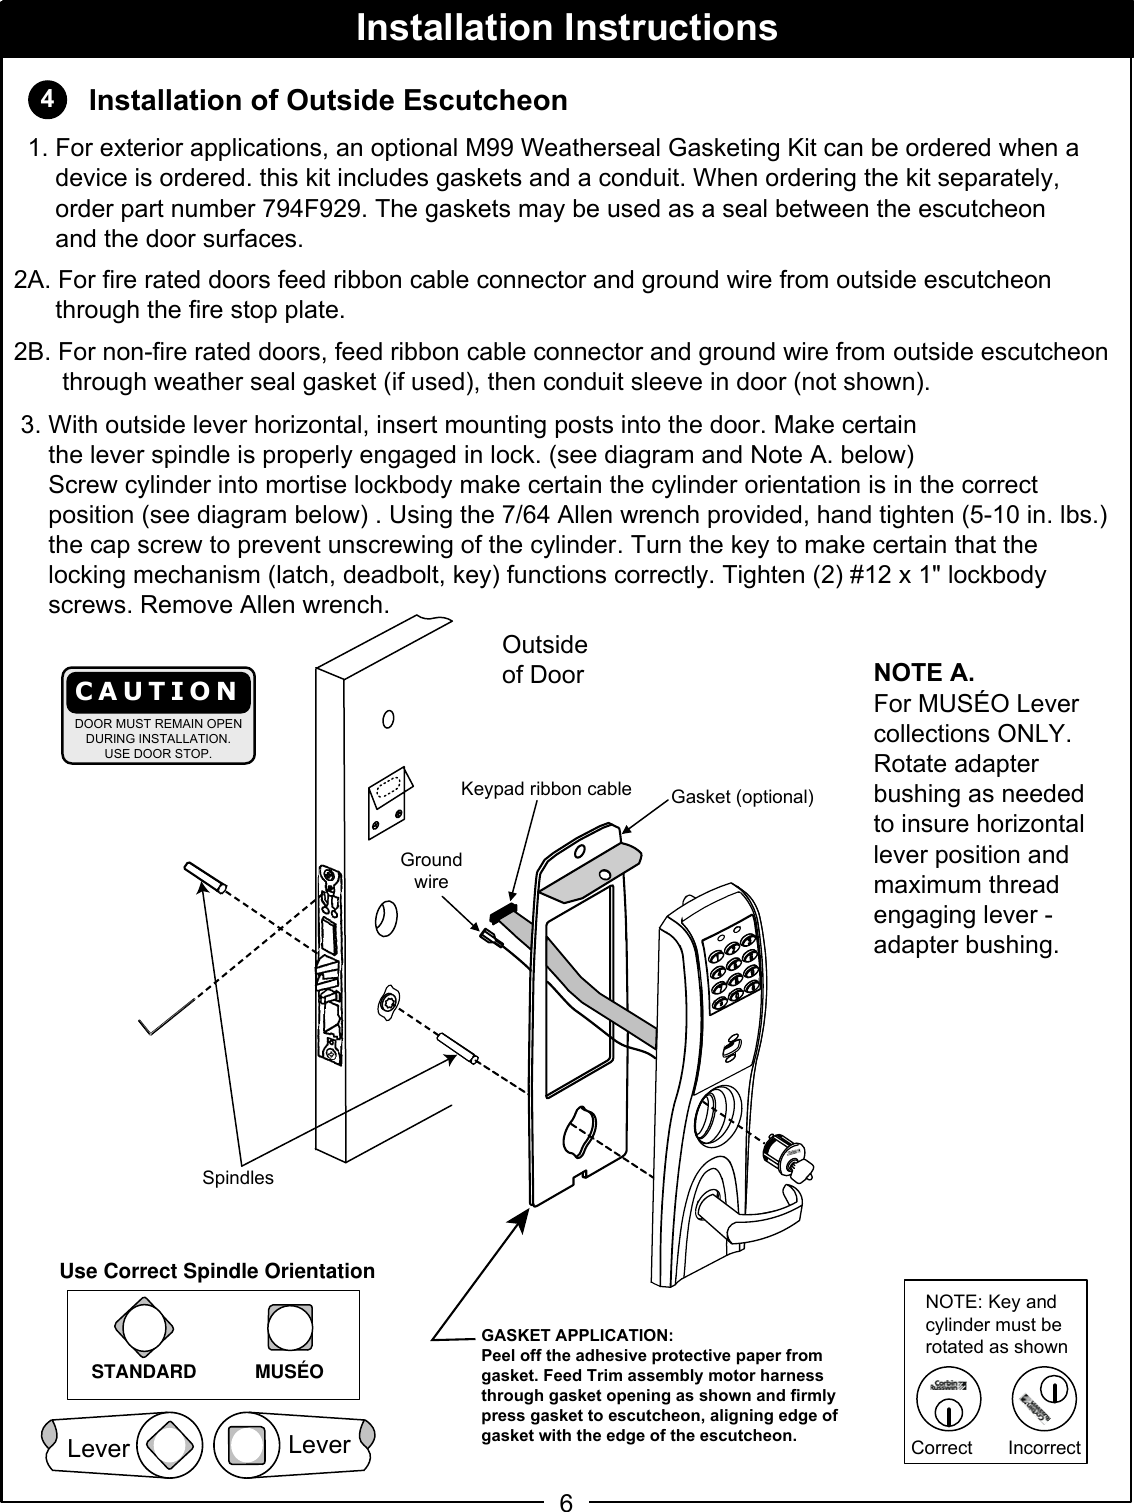 46SpindlesKeypad ribbon cableOutsideof DoorInstallation of Outside Escutcheon2A. For fire rated doors feed ribbon cable connector and ground wire from outside escutcheon        through the fire stop plate.2B. For non-fire rated doors, feed ribbon cable connector and ground wire from outside escutcheon         through weather seal gasket (if used), then conduit sleeve in door (not shown). 3. With outside lever horizontal, insert mounting posts into the door. Make certain      the lever spindle is properly engaged in lock. (see diagram and Note A. below)     Screw cylinder into mortise lockbody make certain the cylinder orientation is in the correct        position (see diagram below) . Using the 7/64 Allen wrench provided, hand tighten (5-10 in. lbs.)           the cap screw to prevent unscrewing of the cylinder. Turn the key to make certain that the       locking mechanism (latch, deadbolt, key) functions correctly. Tighten (2) #12 x 1&quot; lockbody       screws. Remove Allen wrench.Installation InstructionsGroundwireGasket (optional)CAUTIONDOOR MUST REMAIN OPENDURING INSTALLATION.USE DOOR STOP.NOTE: Key and cylinder must be rotated as shownCorrect IncorrectUse Correct Spindle OrientationSTANDARD MUSÉOGASKET APPLICATION:Peel off the adhesive protective paper from gasket. Feed Trim assembly motor harness through gasket opening as shown and firmly press gasket to escutcheon, aligning edge of gasket with the edge of the escutcheon.  1. For exterior applications, an optional M99 Weatherseal Gasketing Kit can be ordered when a      device is ordered. this kit includes gaskets and a conduit. When ordering the kit separately,      order part number 794F929. The gaskets may be used as a seal between the escutcheon      and the door surfaces.NOTE A.For MUSÉO Lever collections ONLY.Rotate adapter bushing as neededto insure horizontal lever position and maximum thread engaging lever - adapter bushing.LeverLever